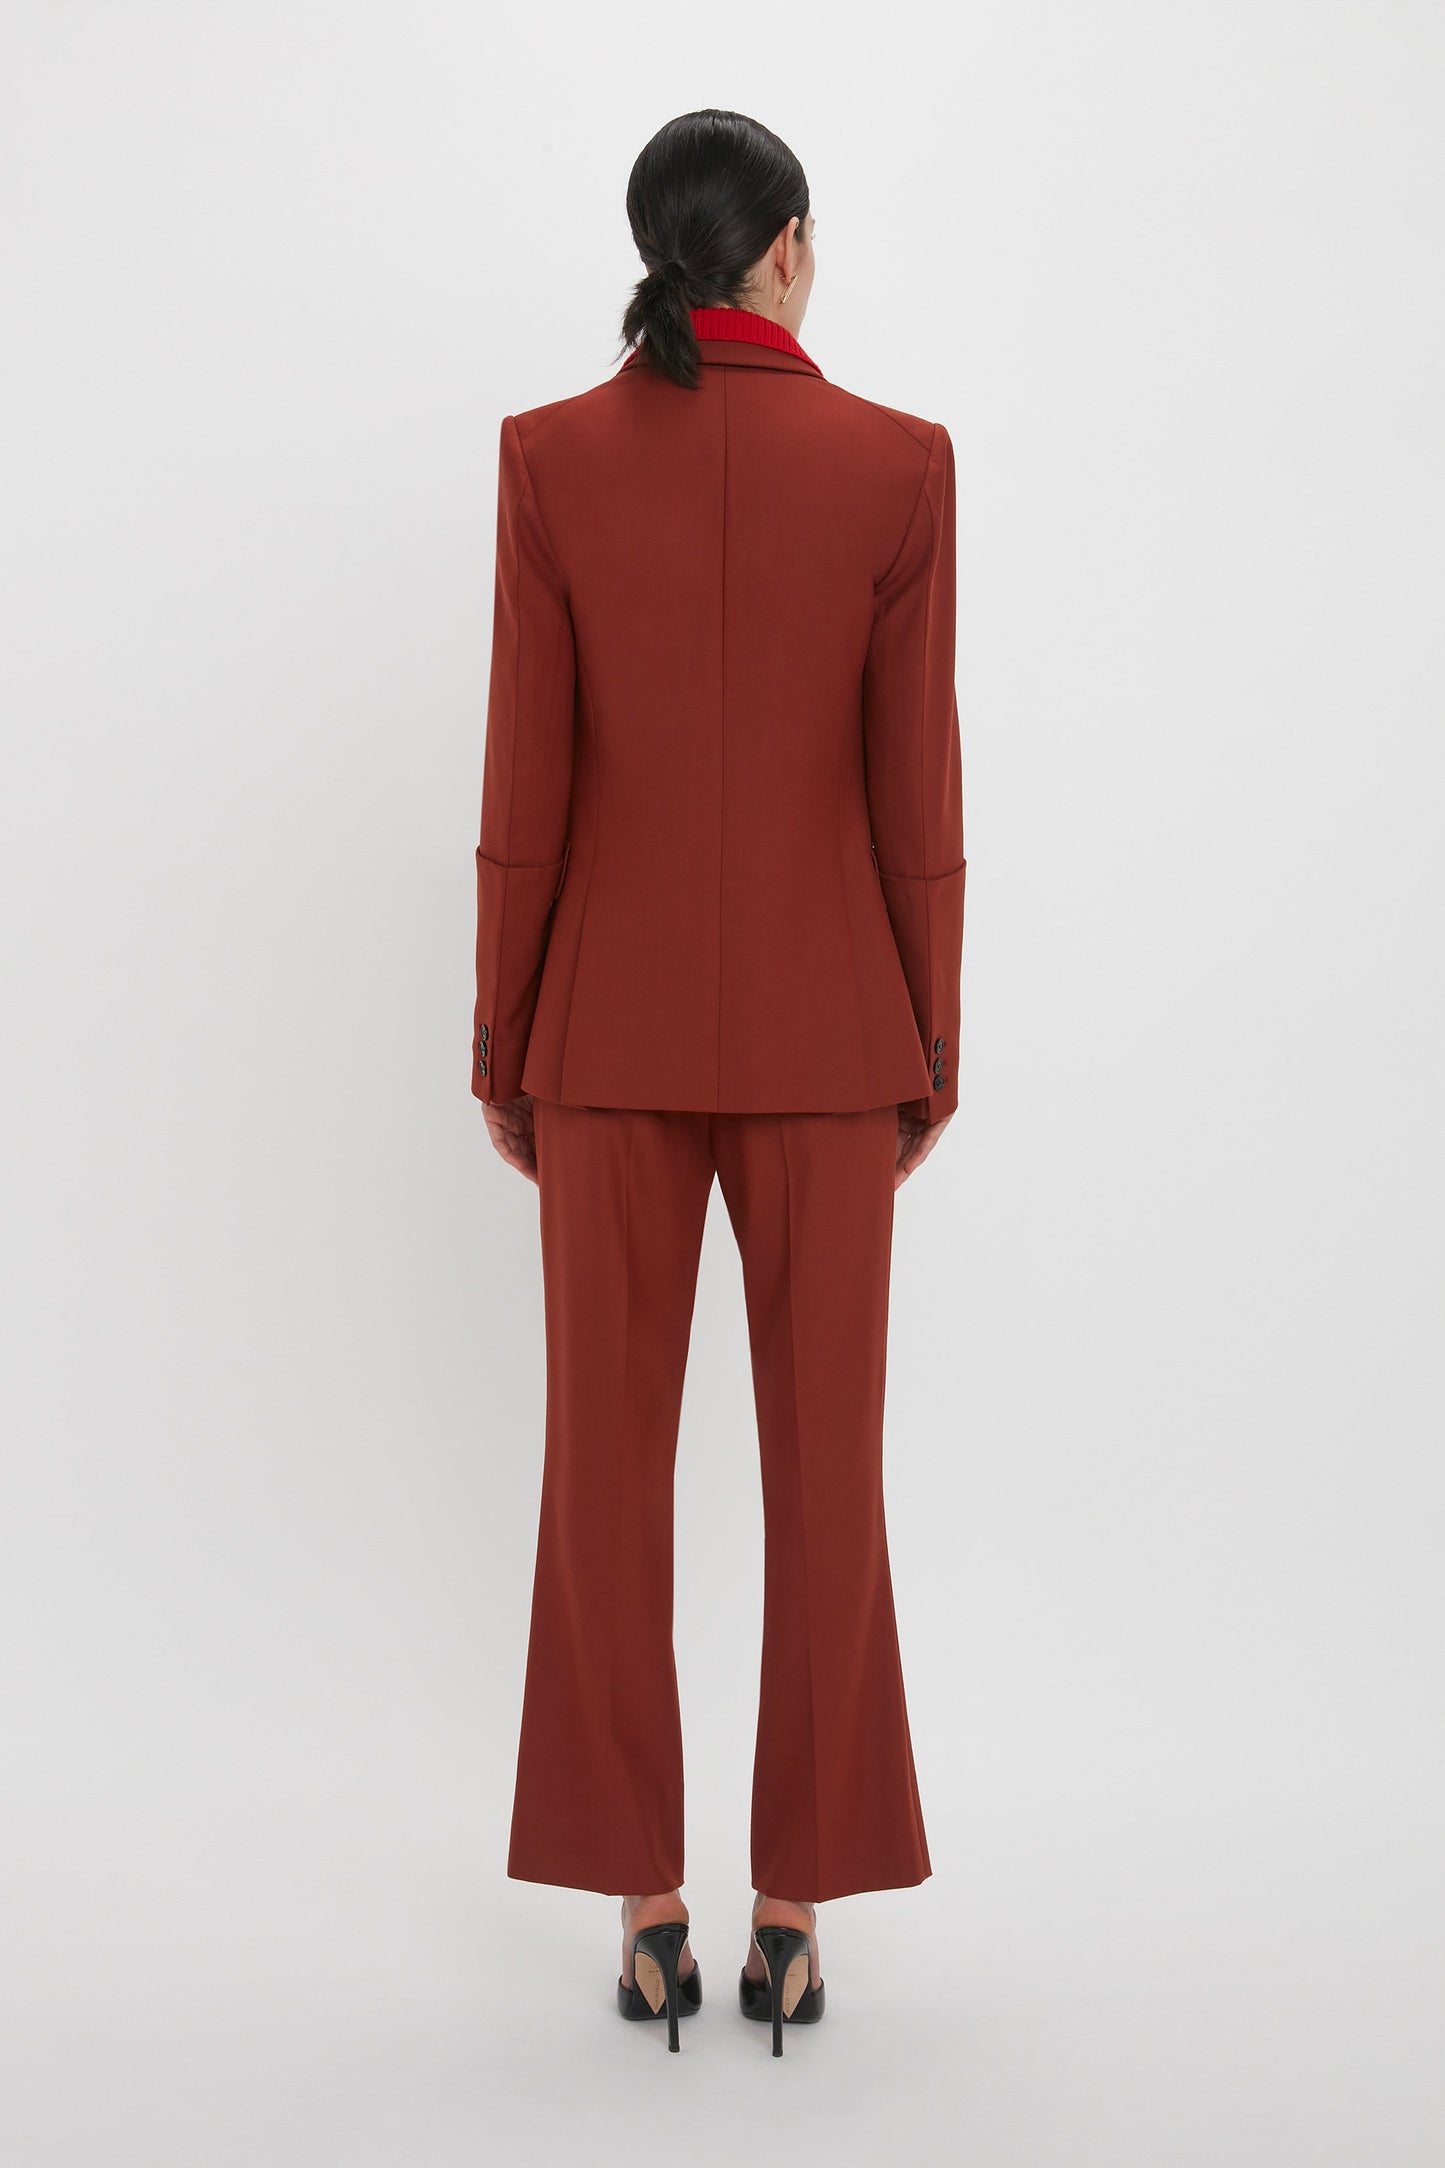 A person with dark hair is standing with their back to the camera, wearing a Sleeve Detail Patch Pocket Jacket In Russet by Victoria Beckham crafted from recycled wool and black high-heeled shoes, showcasing contemporary detailing against a plain white background.